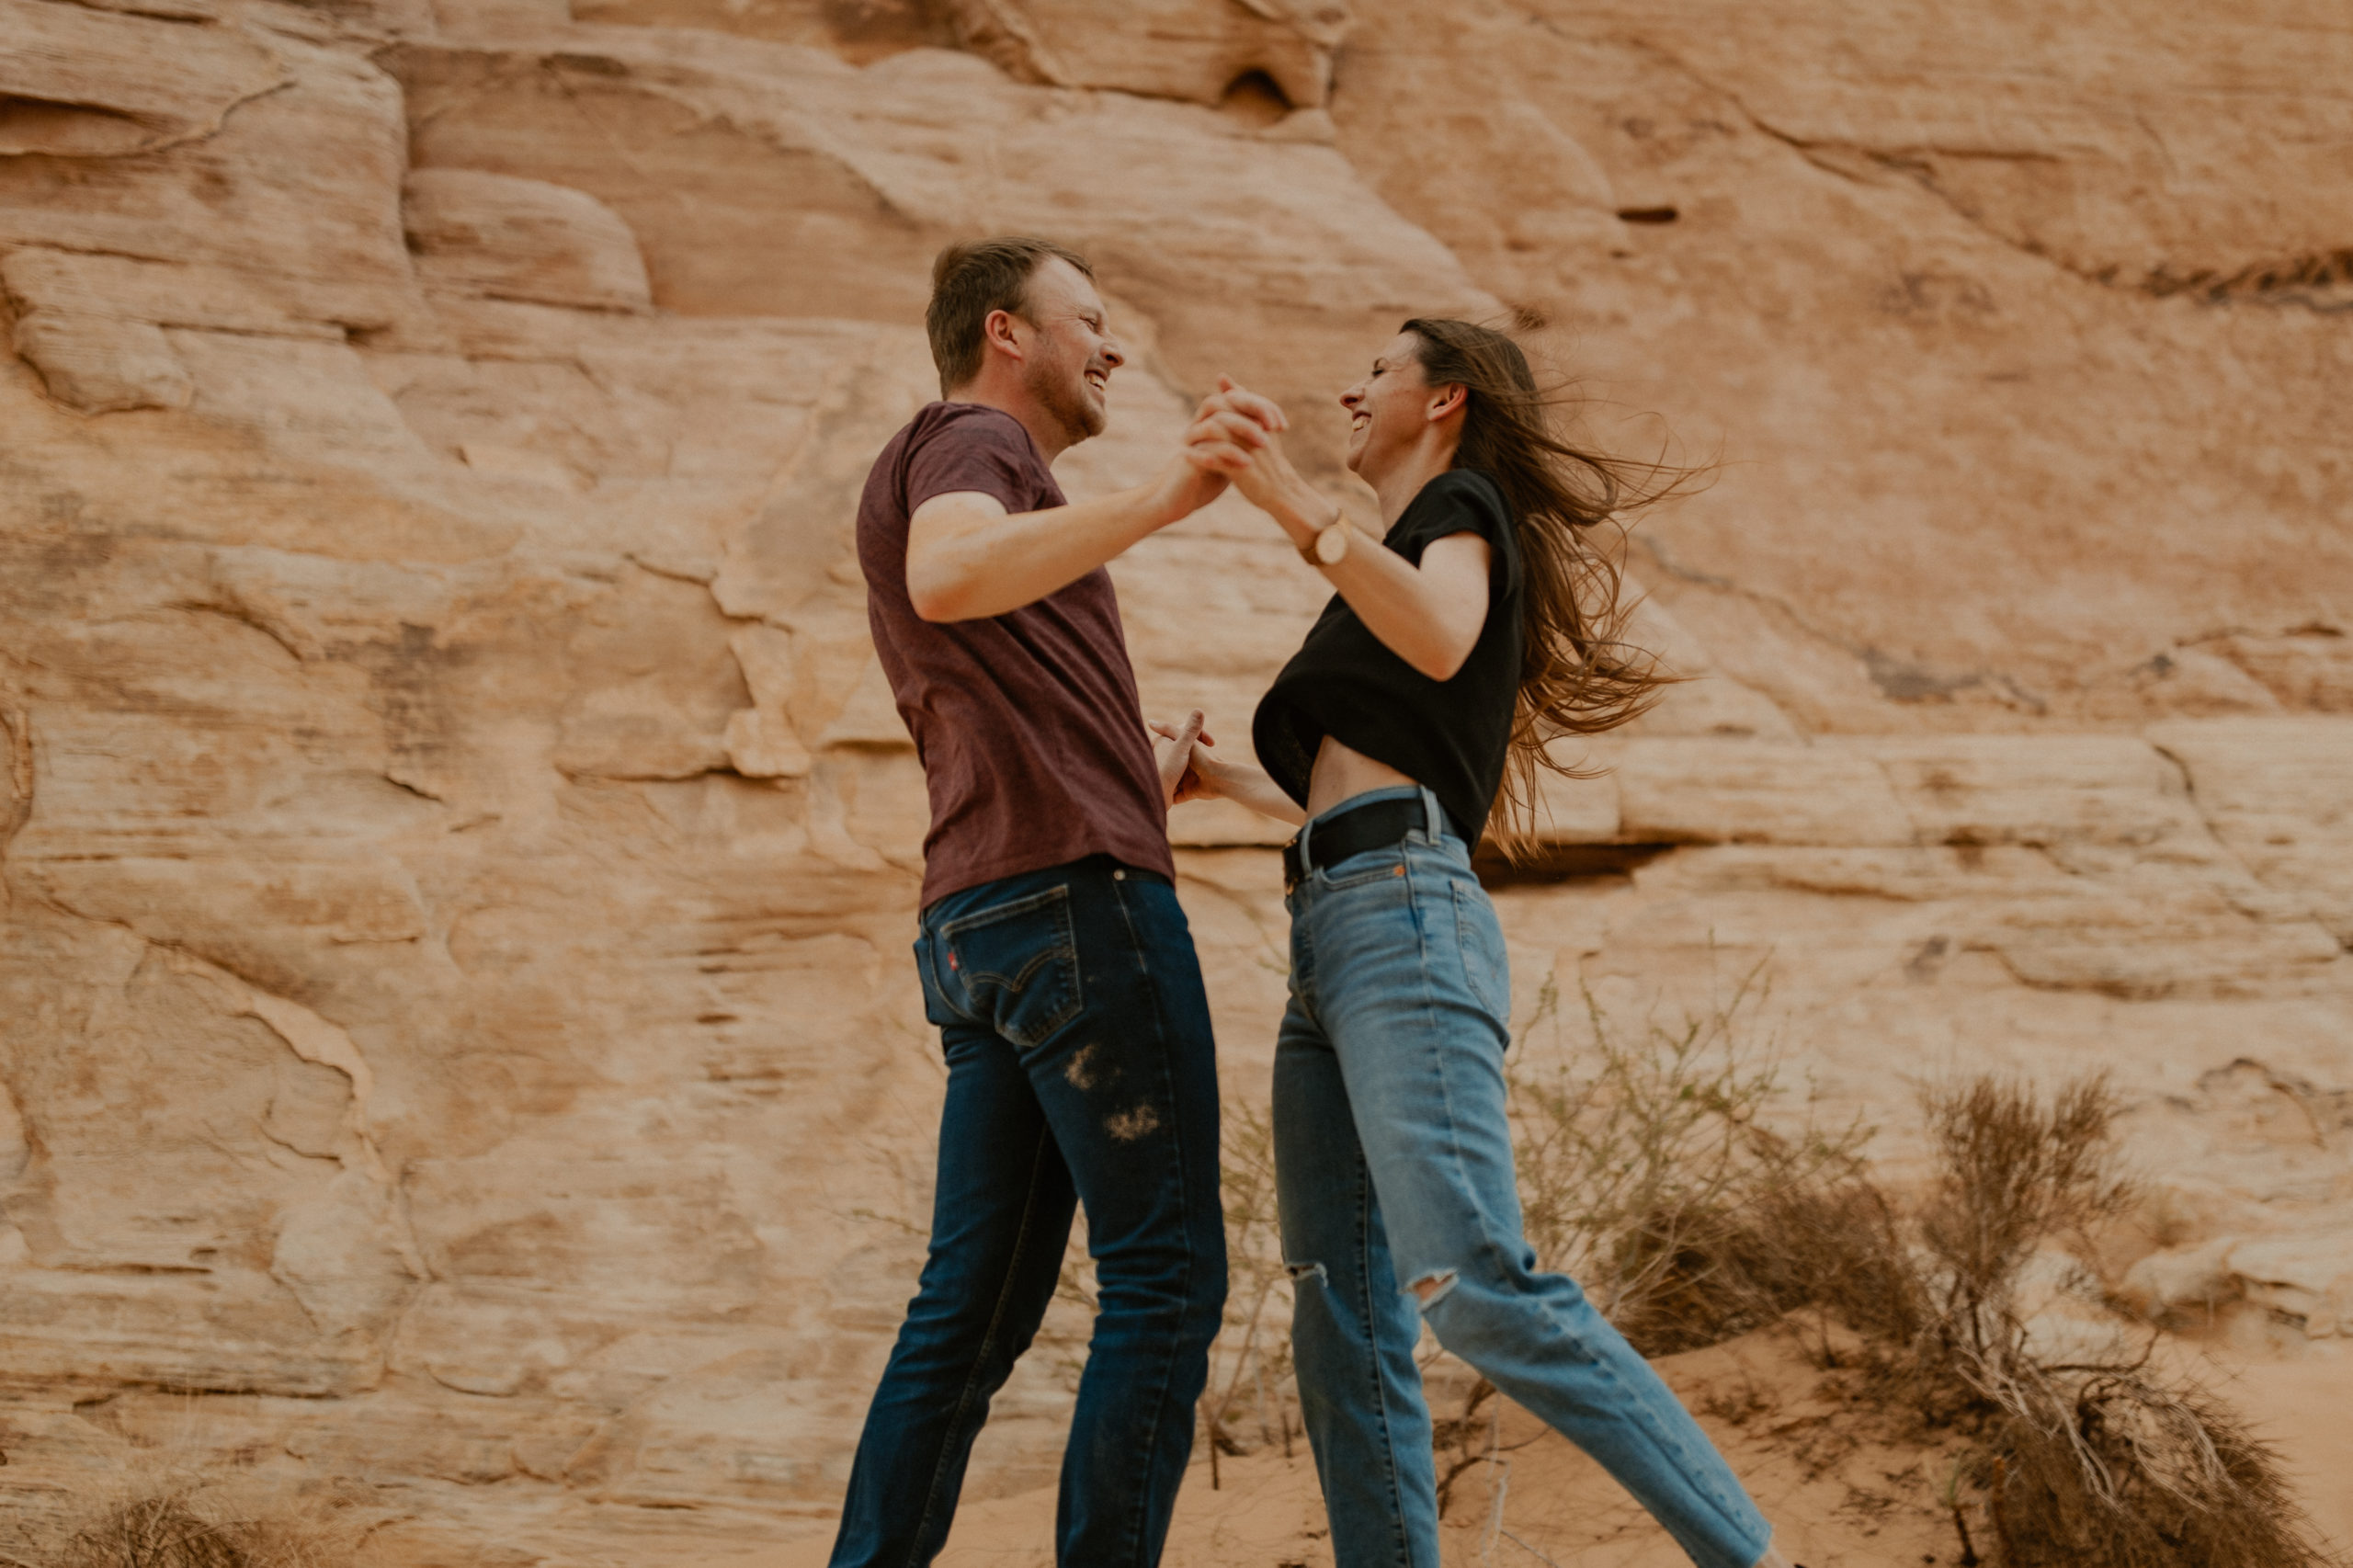 Cute couple being playful together in the desert